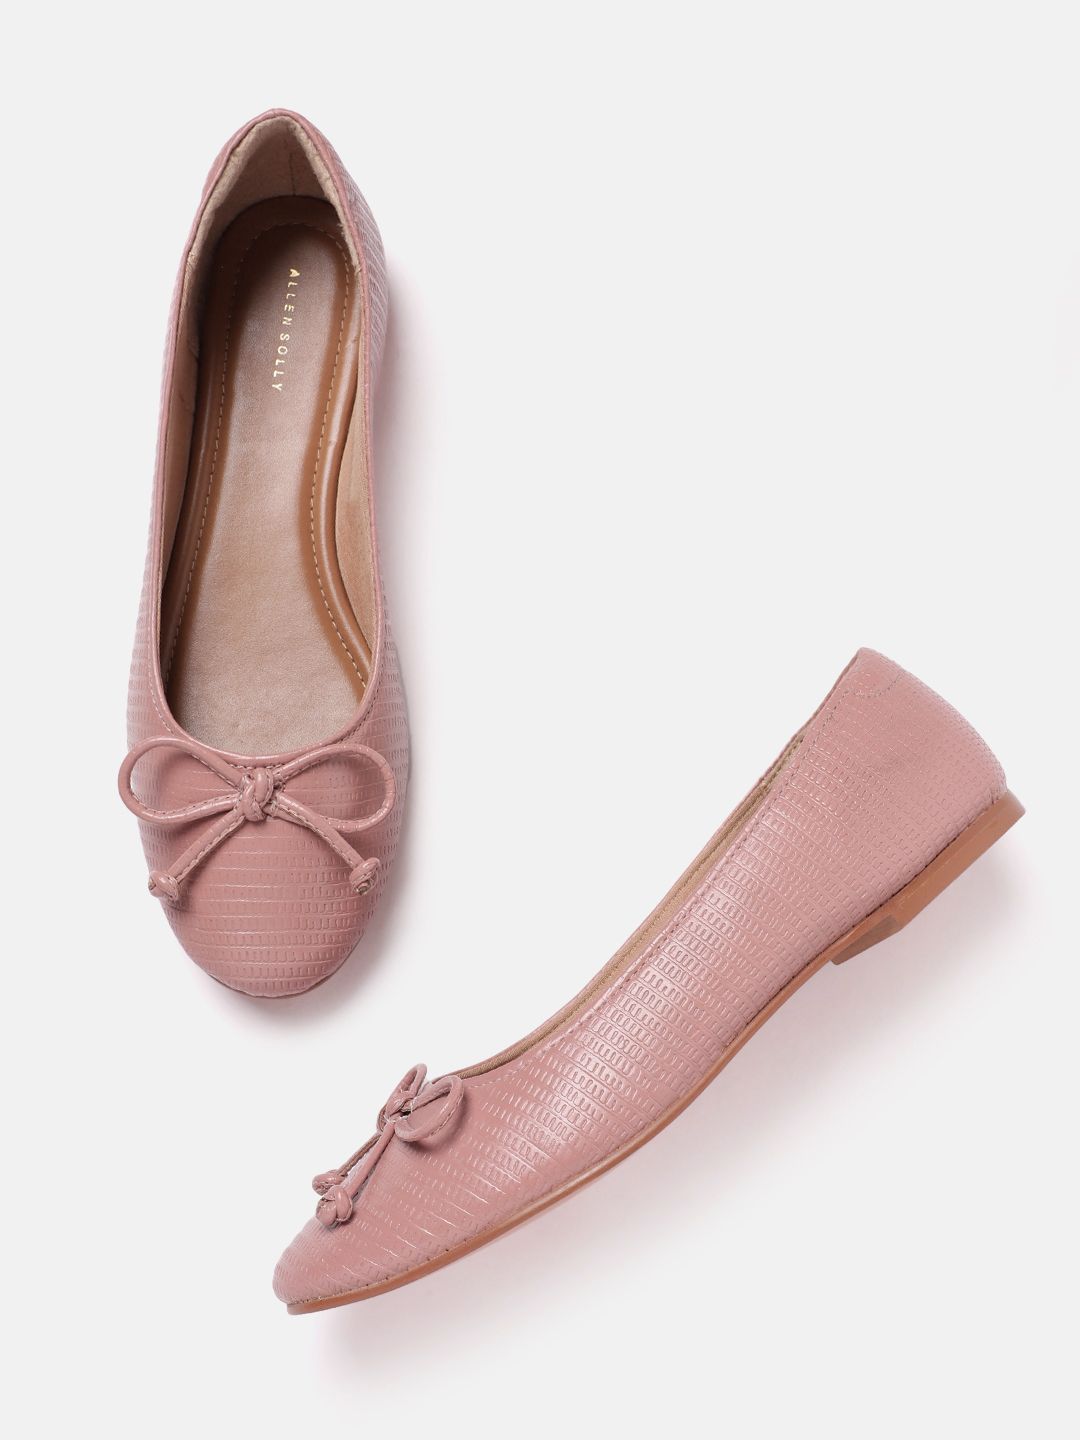 Allen Solly Women Reptile Textured Ballerinas with Bows Detail Price in India